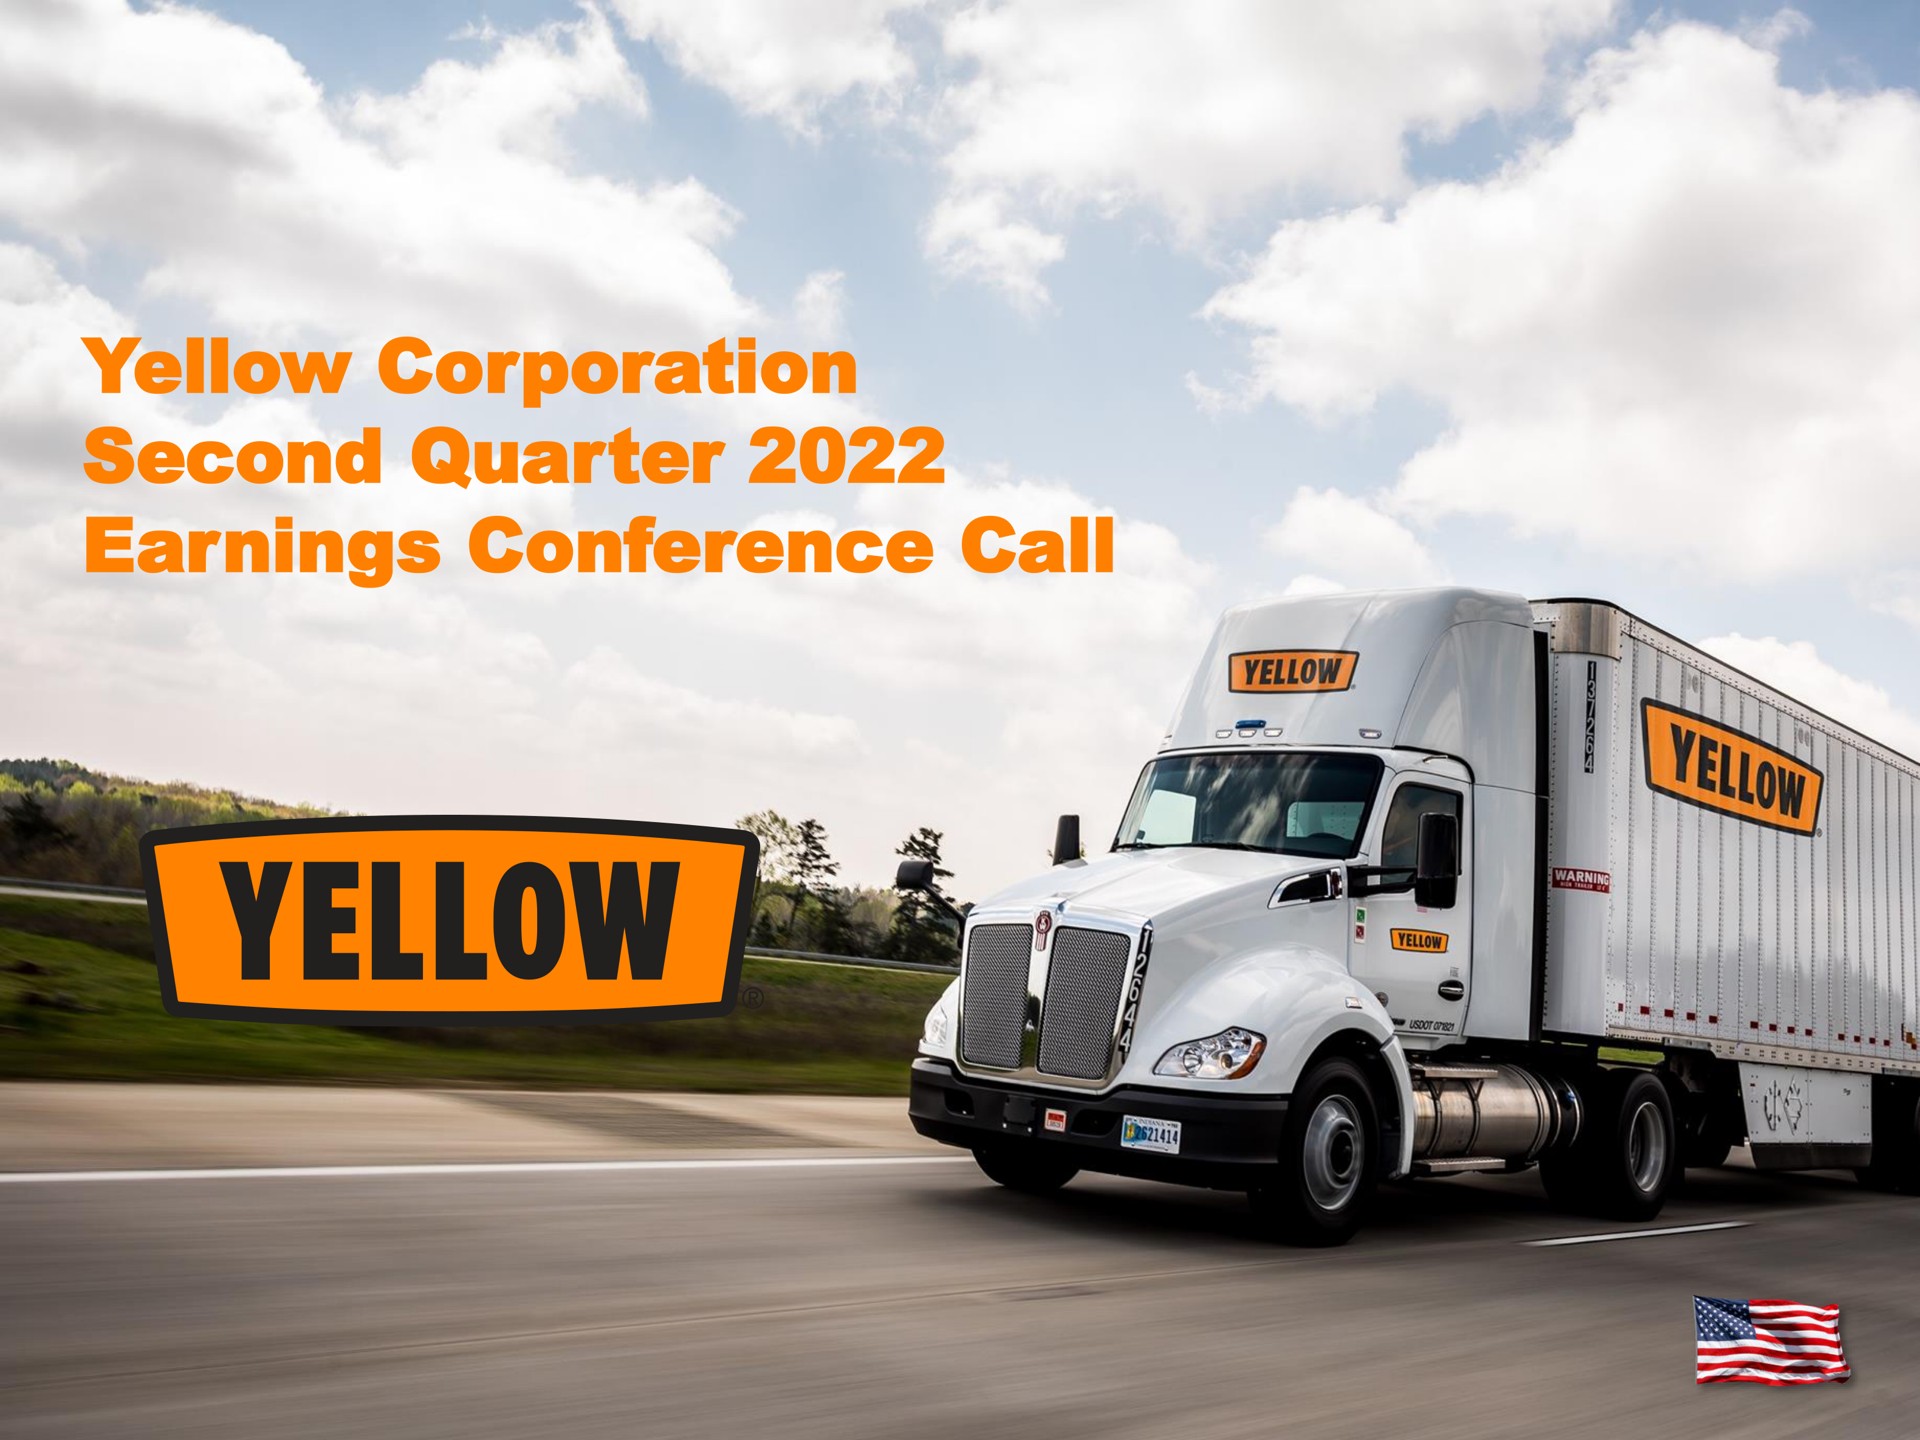 yellow corporation second quarter earnings conference call | Yellow Corporation